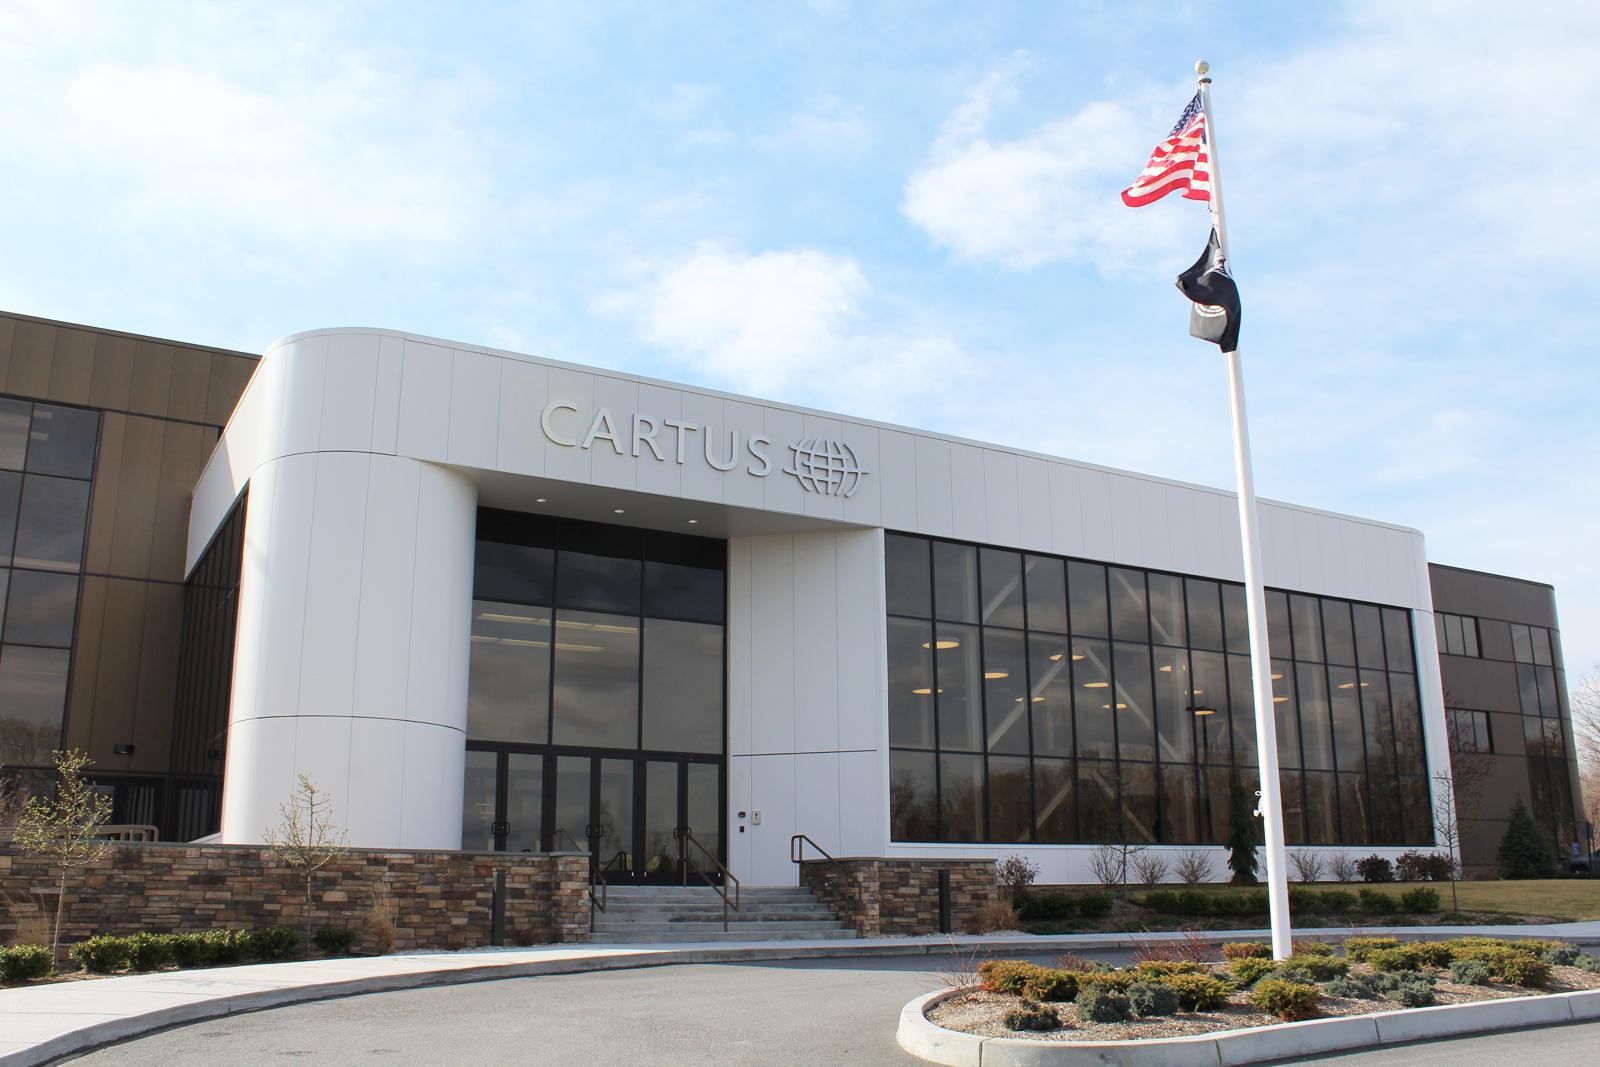 Danbury to get more than Cartus making for its profession academy: ‘Future of education’